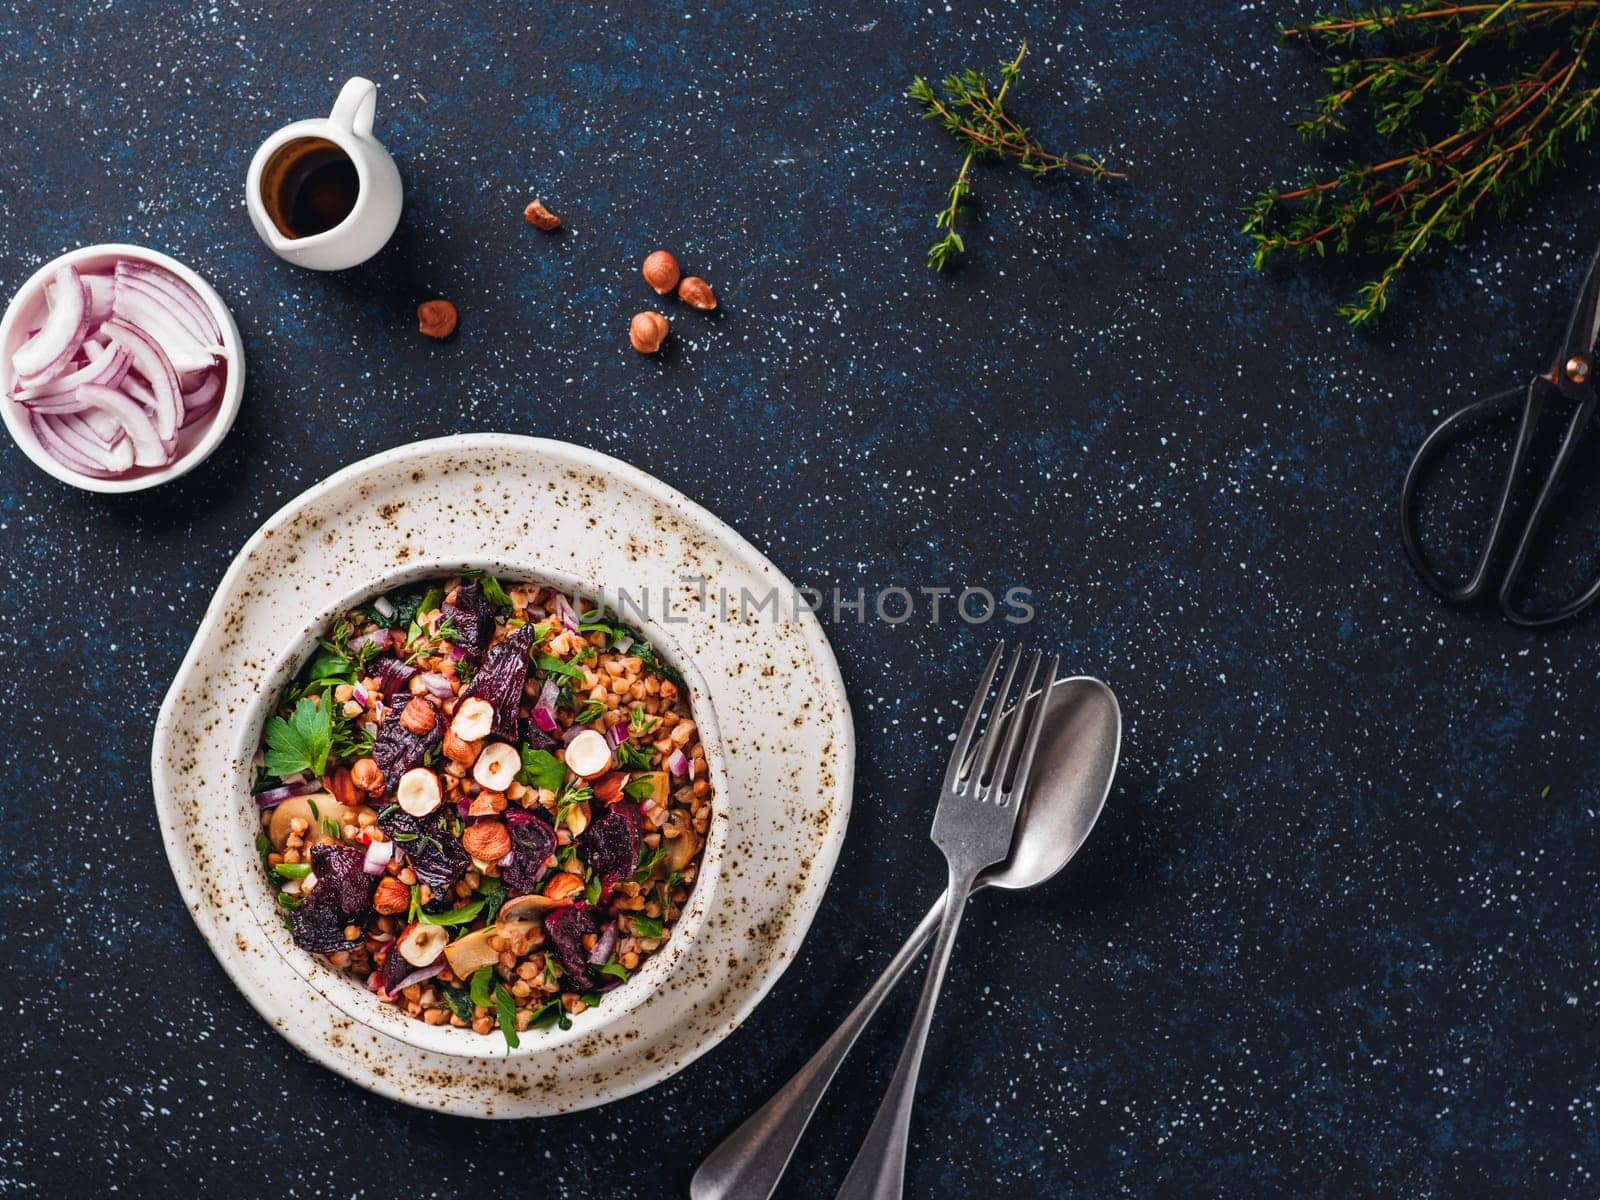 Warm buckwheat and beetroot salad on dark background. Vegetarian diet idea and recipe -salad with beetroot, buckwheat, mushrooms, onion, fresh herbs,hazelnut. Top view or flat-lay. Copy space for text